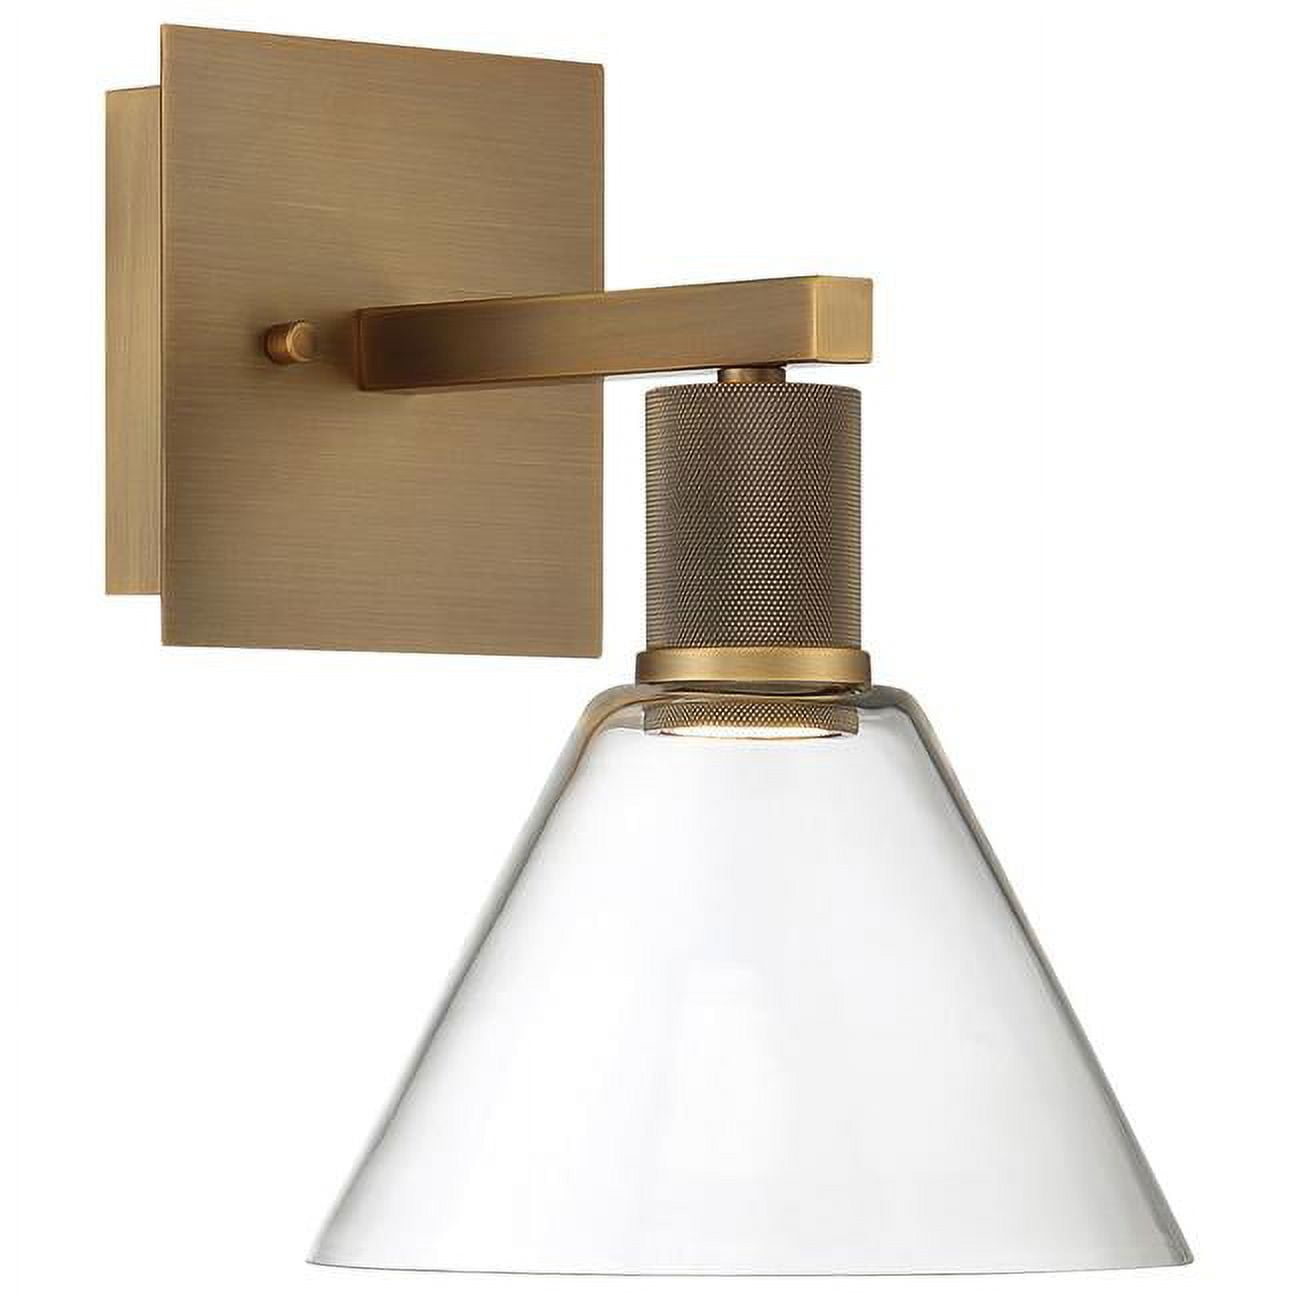 Picture of Access Lighting 63143LEDD-ABB-CLR 8 in. Port Nine 1 Light LED Wall Sconce Wall Light, Clear - Martini - Antique Brushed Brass